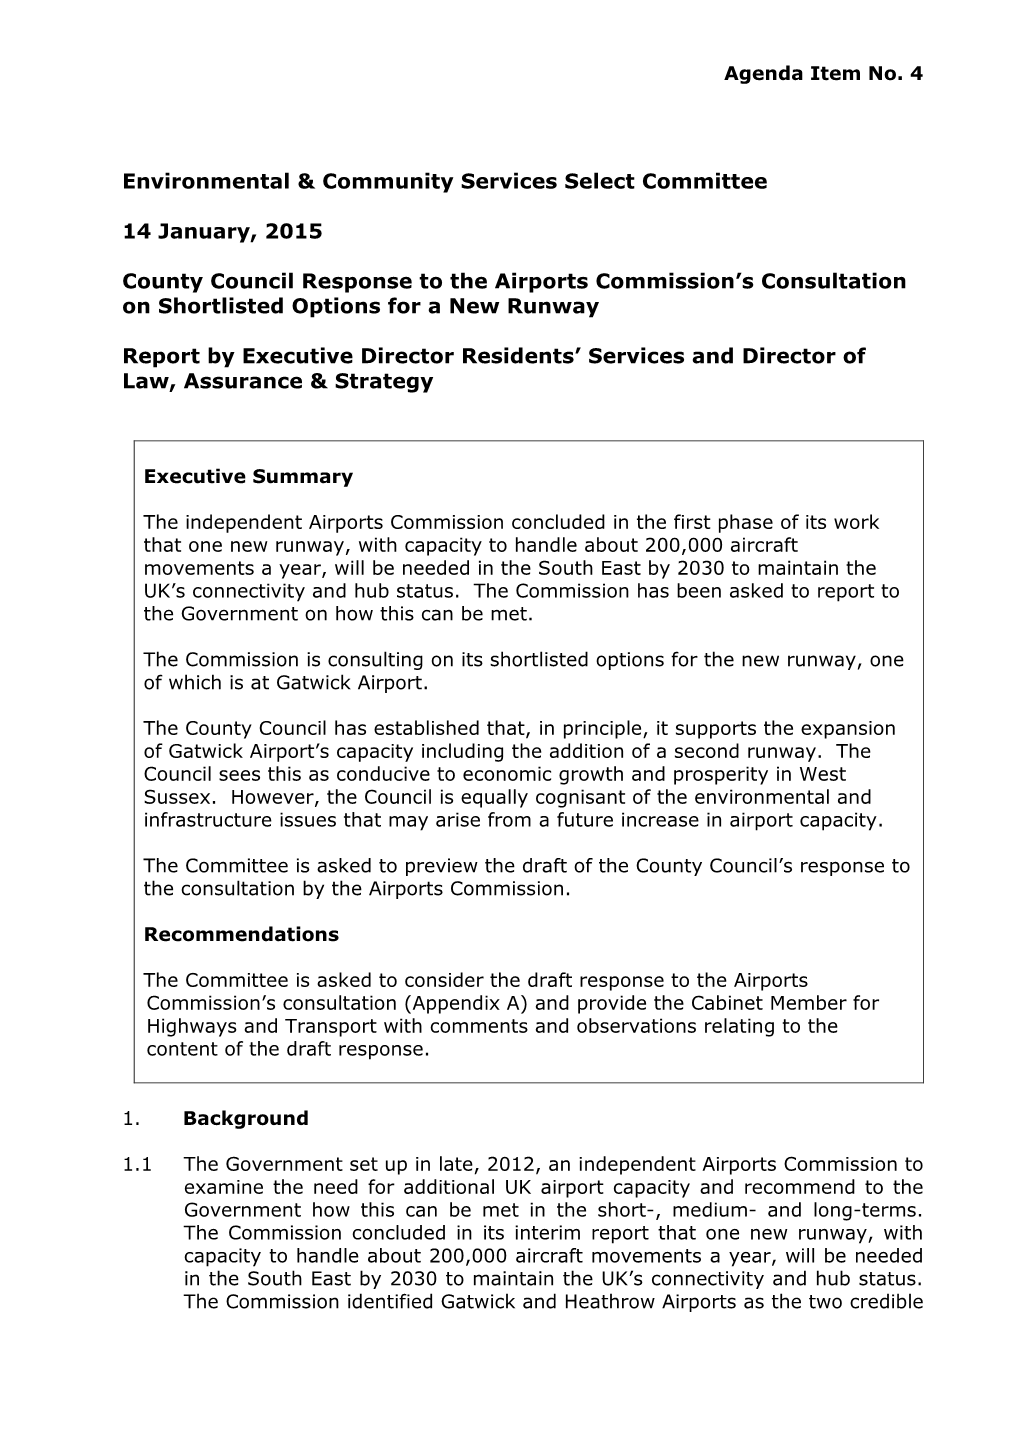 Response to the Airports Commission's Consultation On